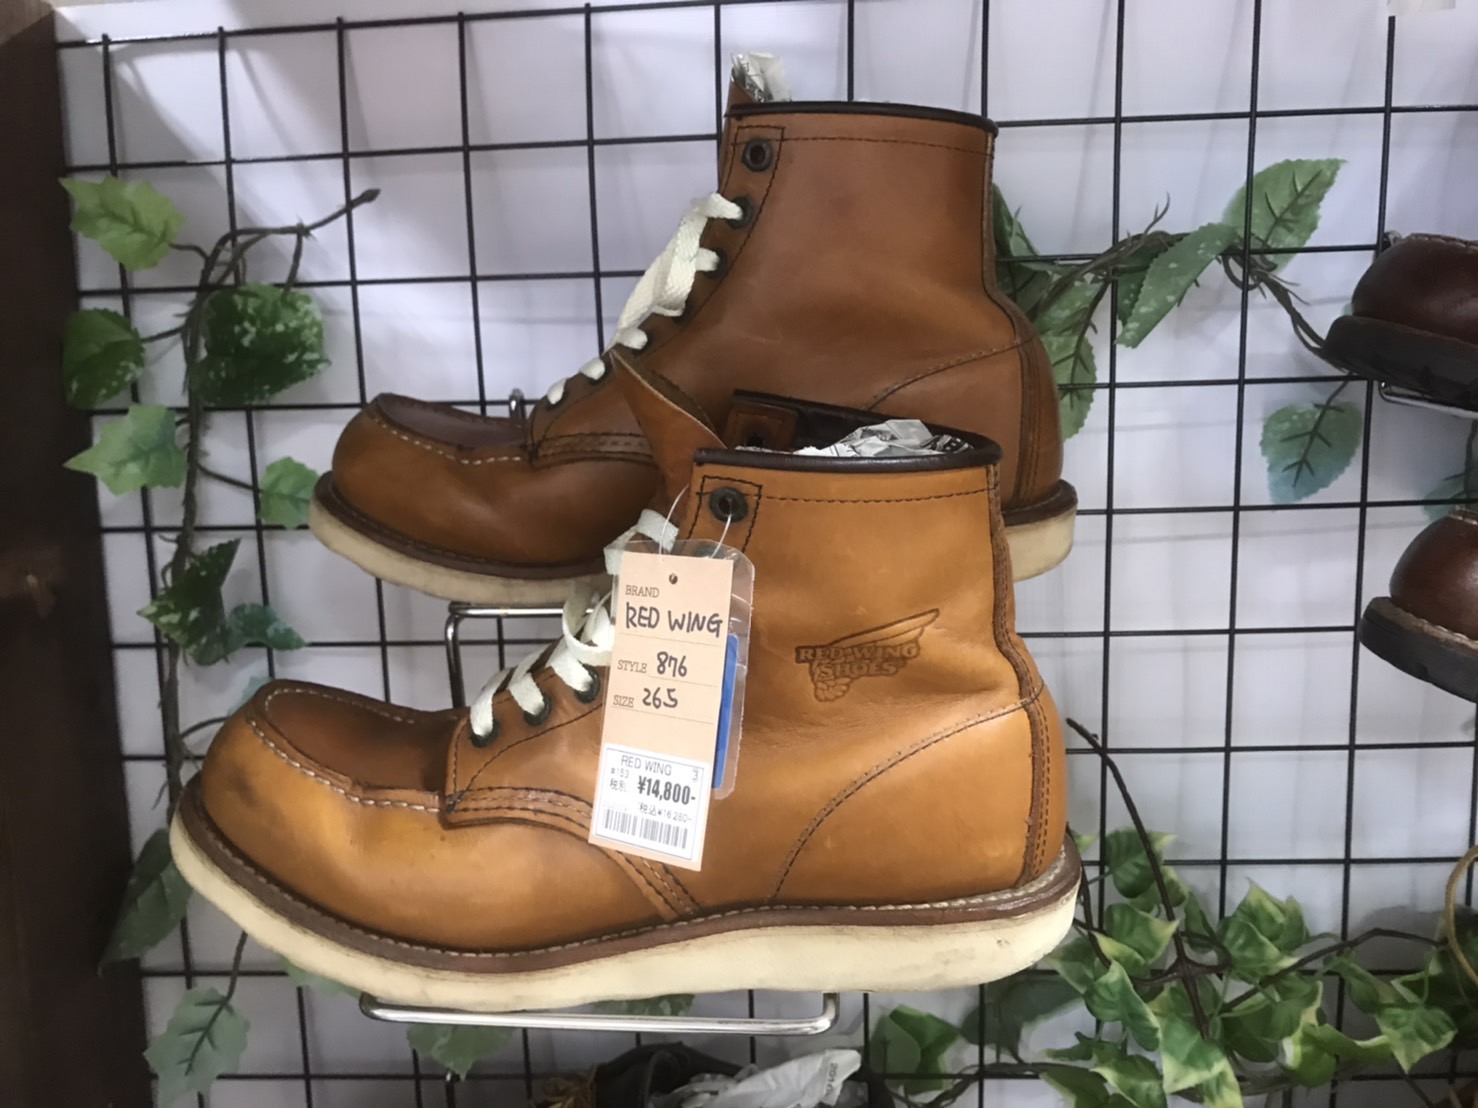 red wing 28.0REDWINGカラー - stratfordtelecoms.com